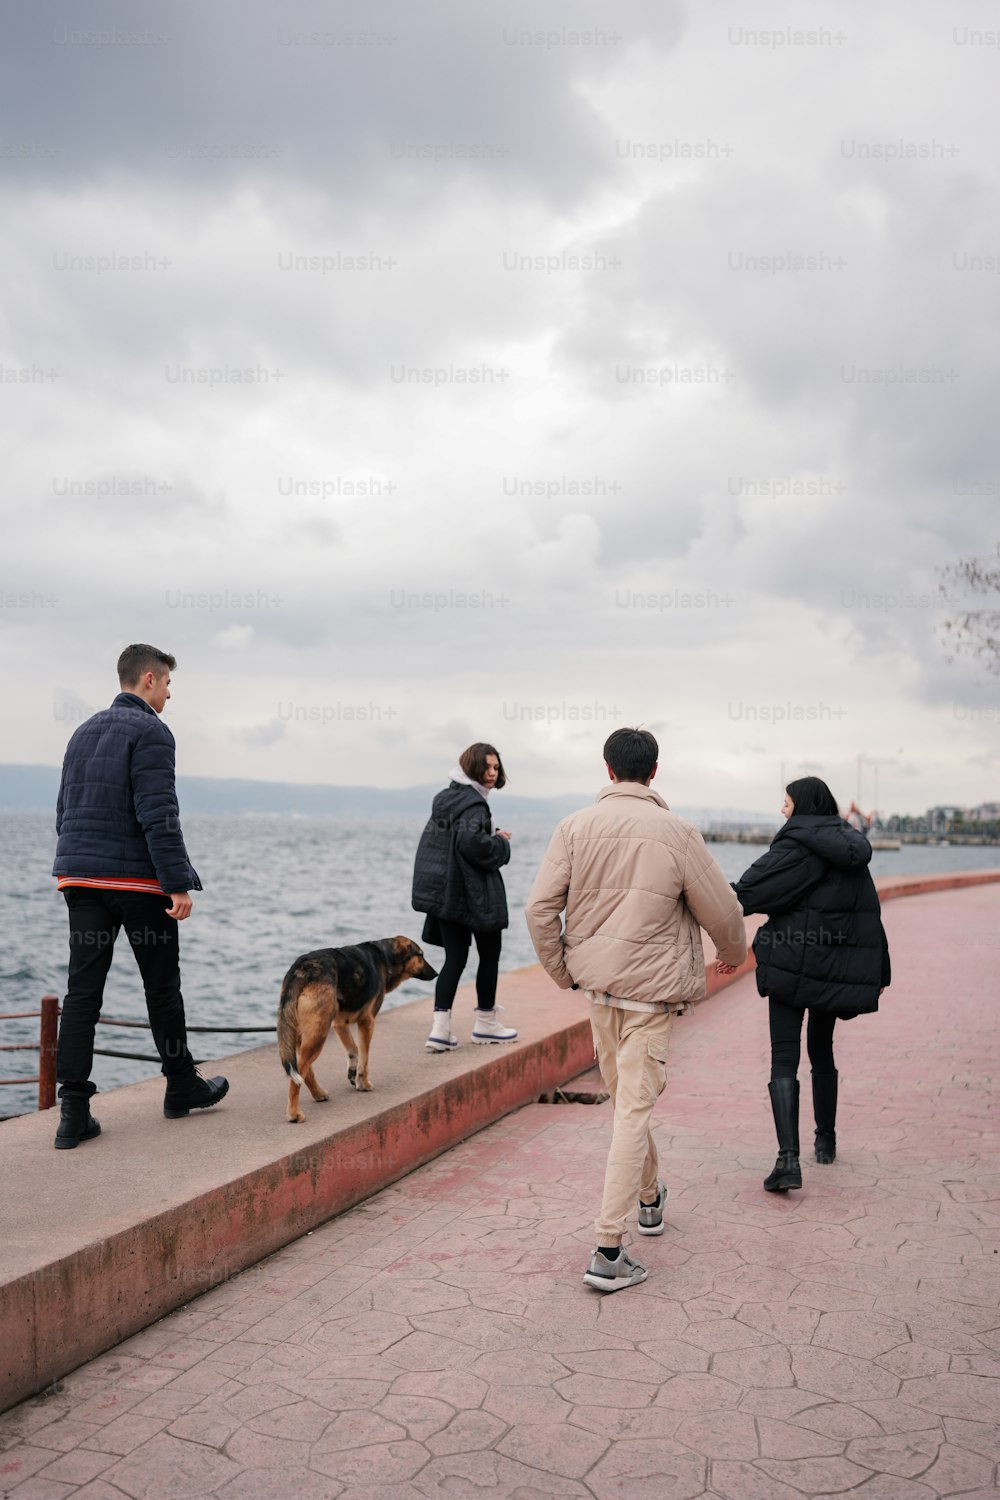 a group of people walking along a sidewalk next to a body of water